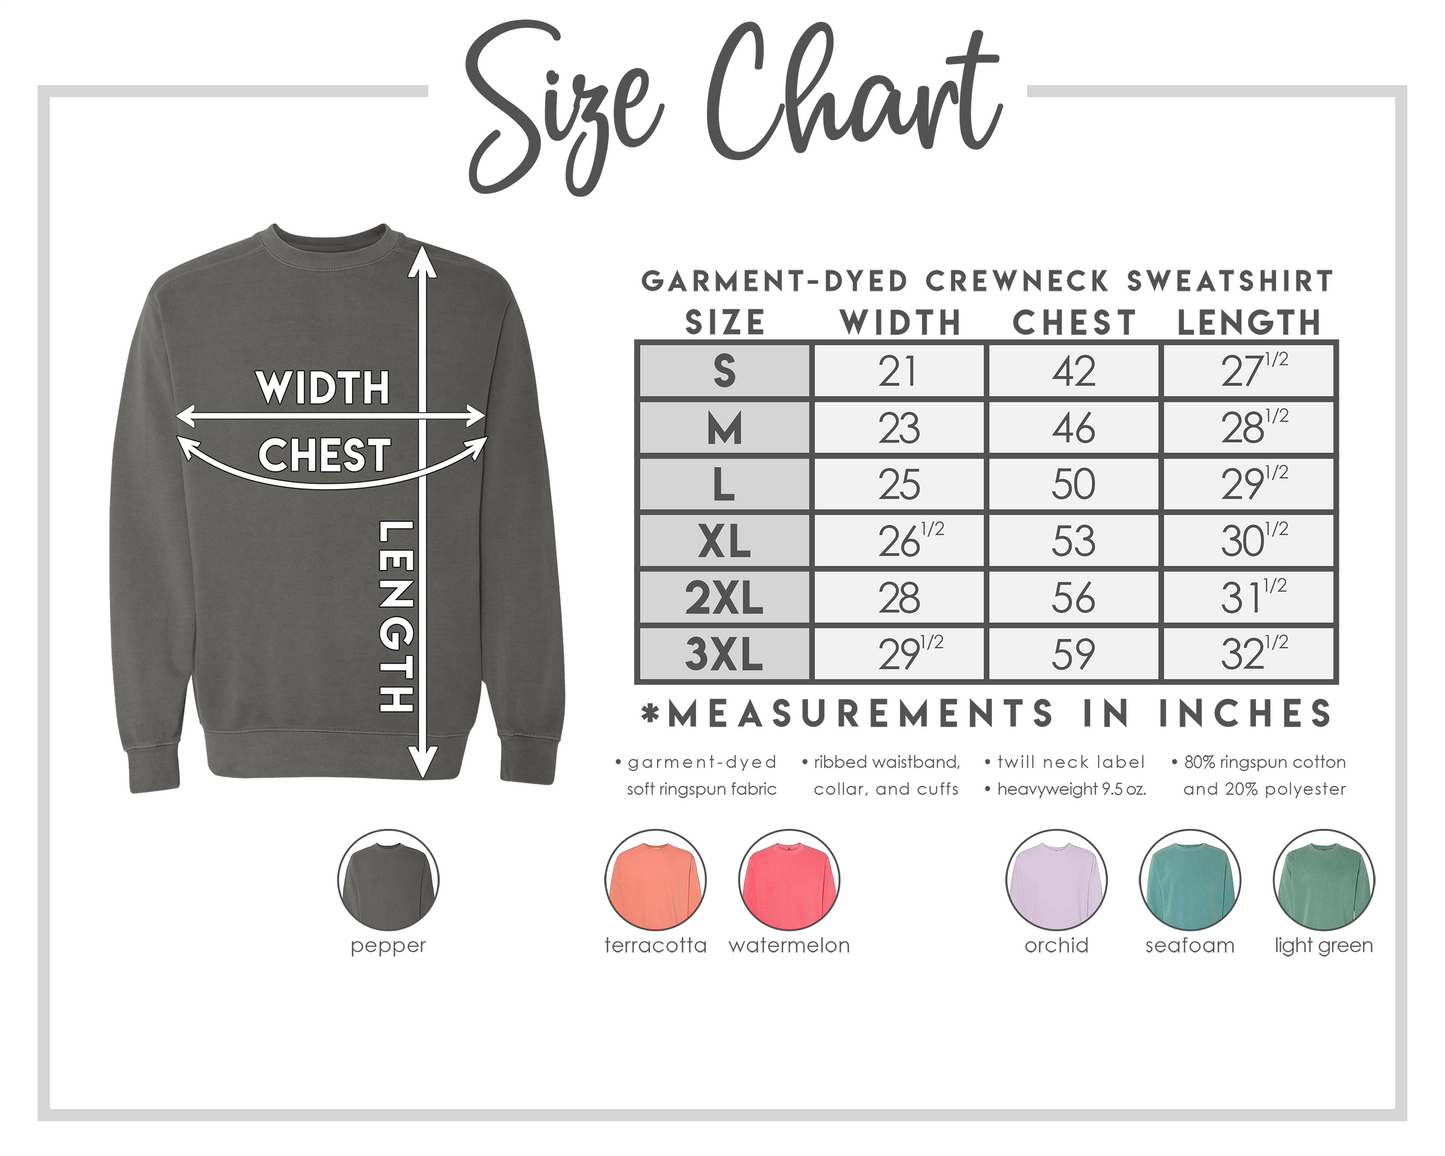 the size chart for a sweatshirt with measurements